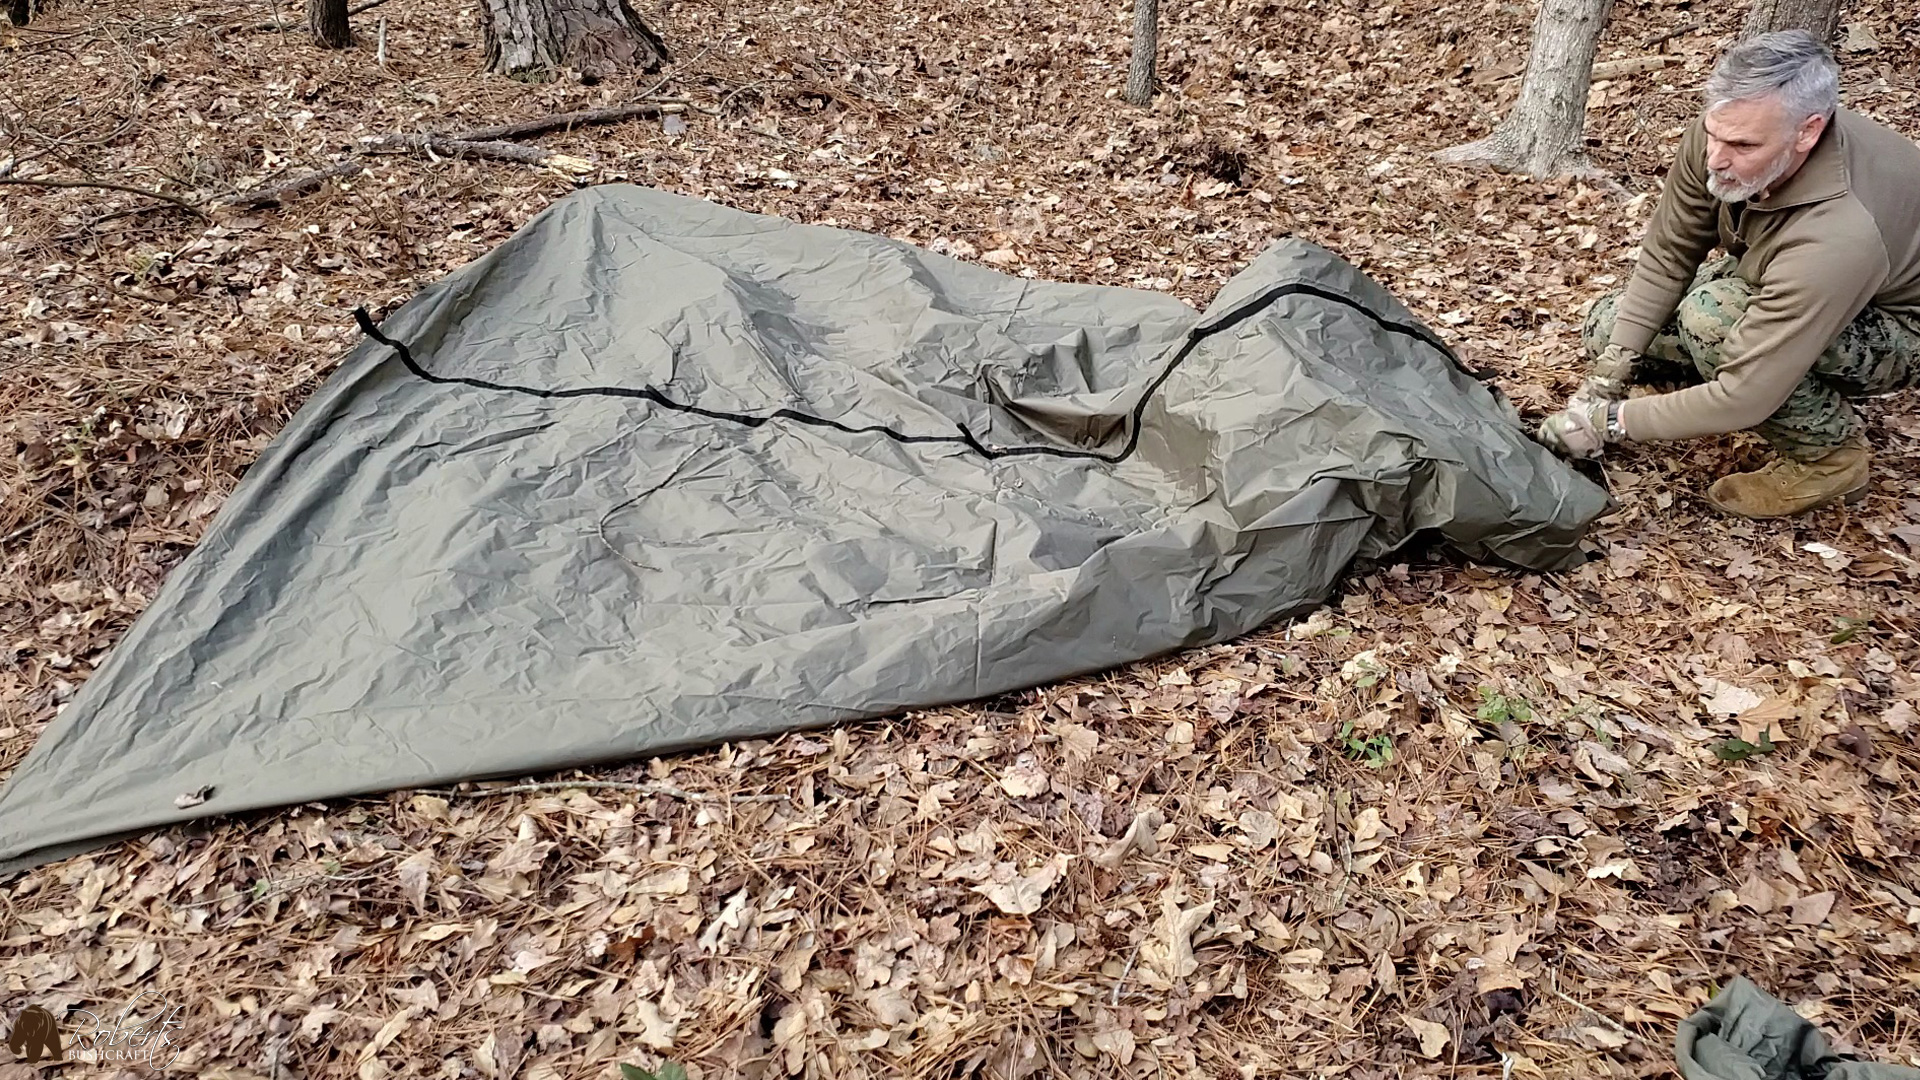 Aqua Quest Defender tarp used for cold weather camping